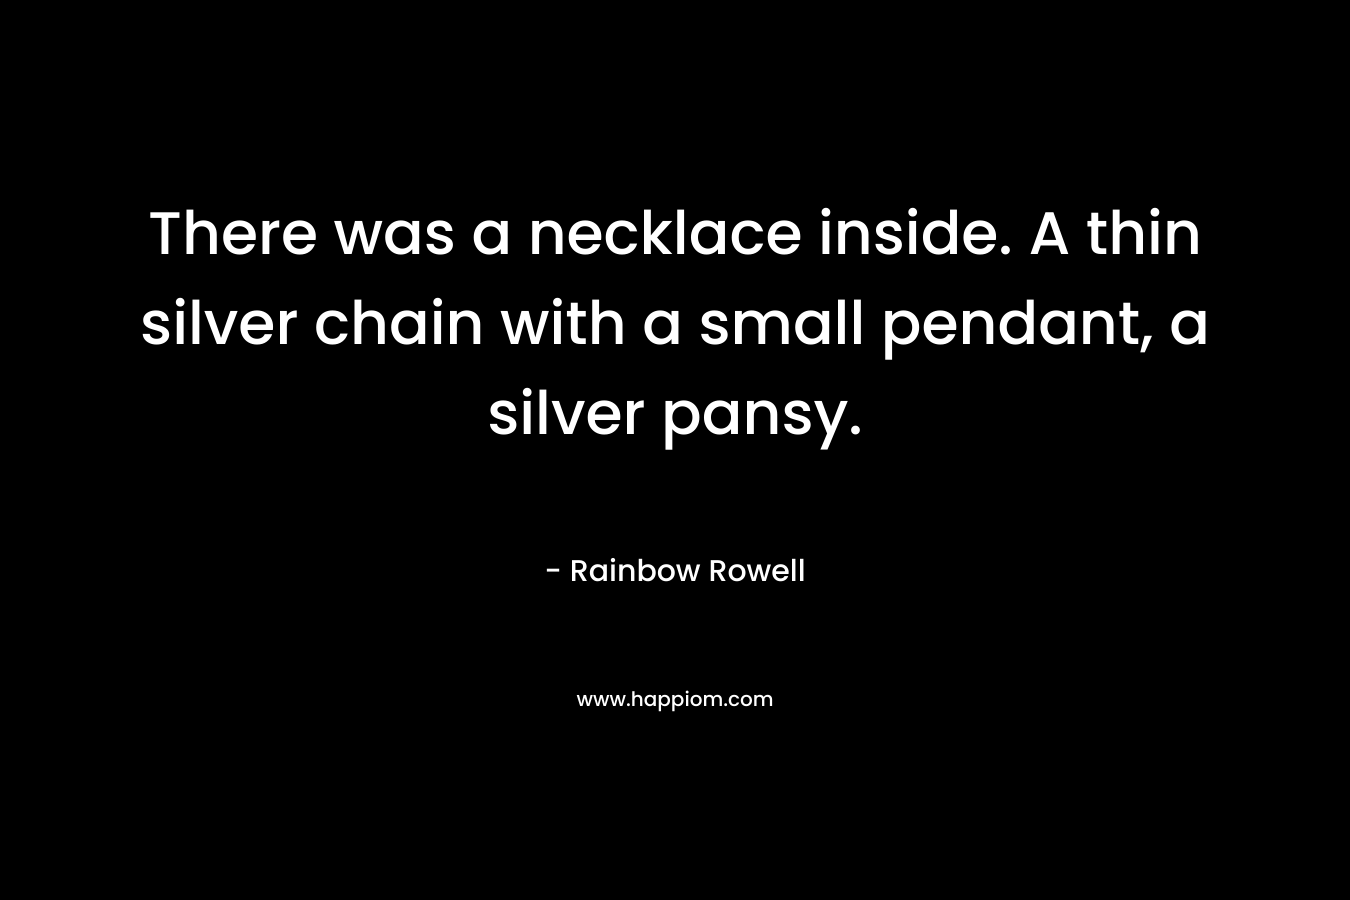 There was a necklace inside. A thin silver chain with a small pendant, a silver pansy.